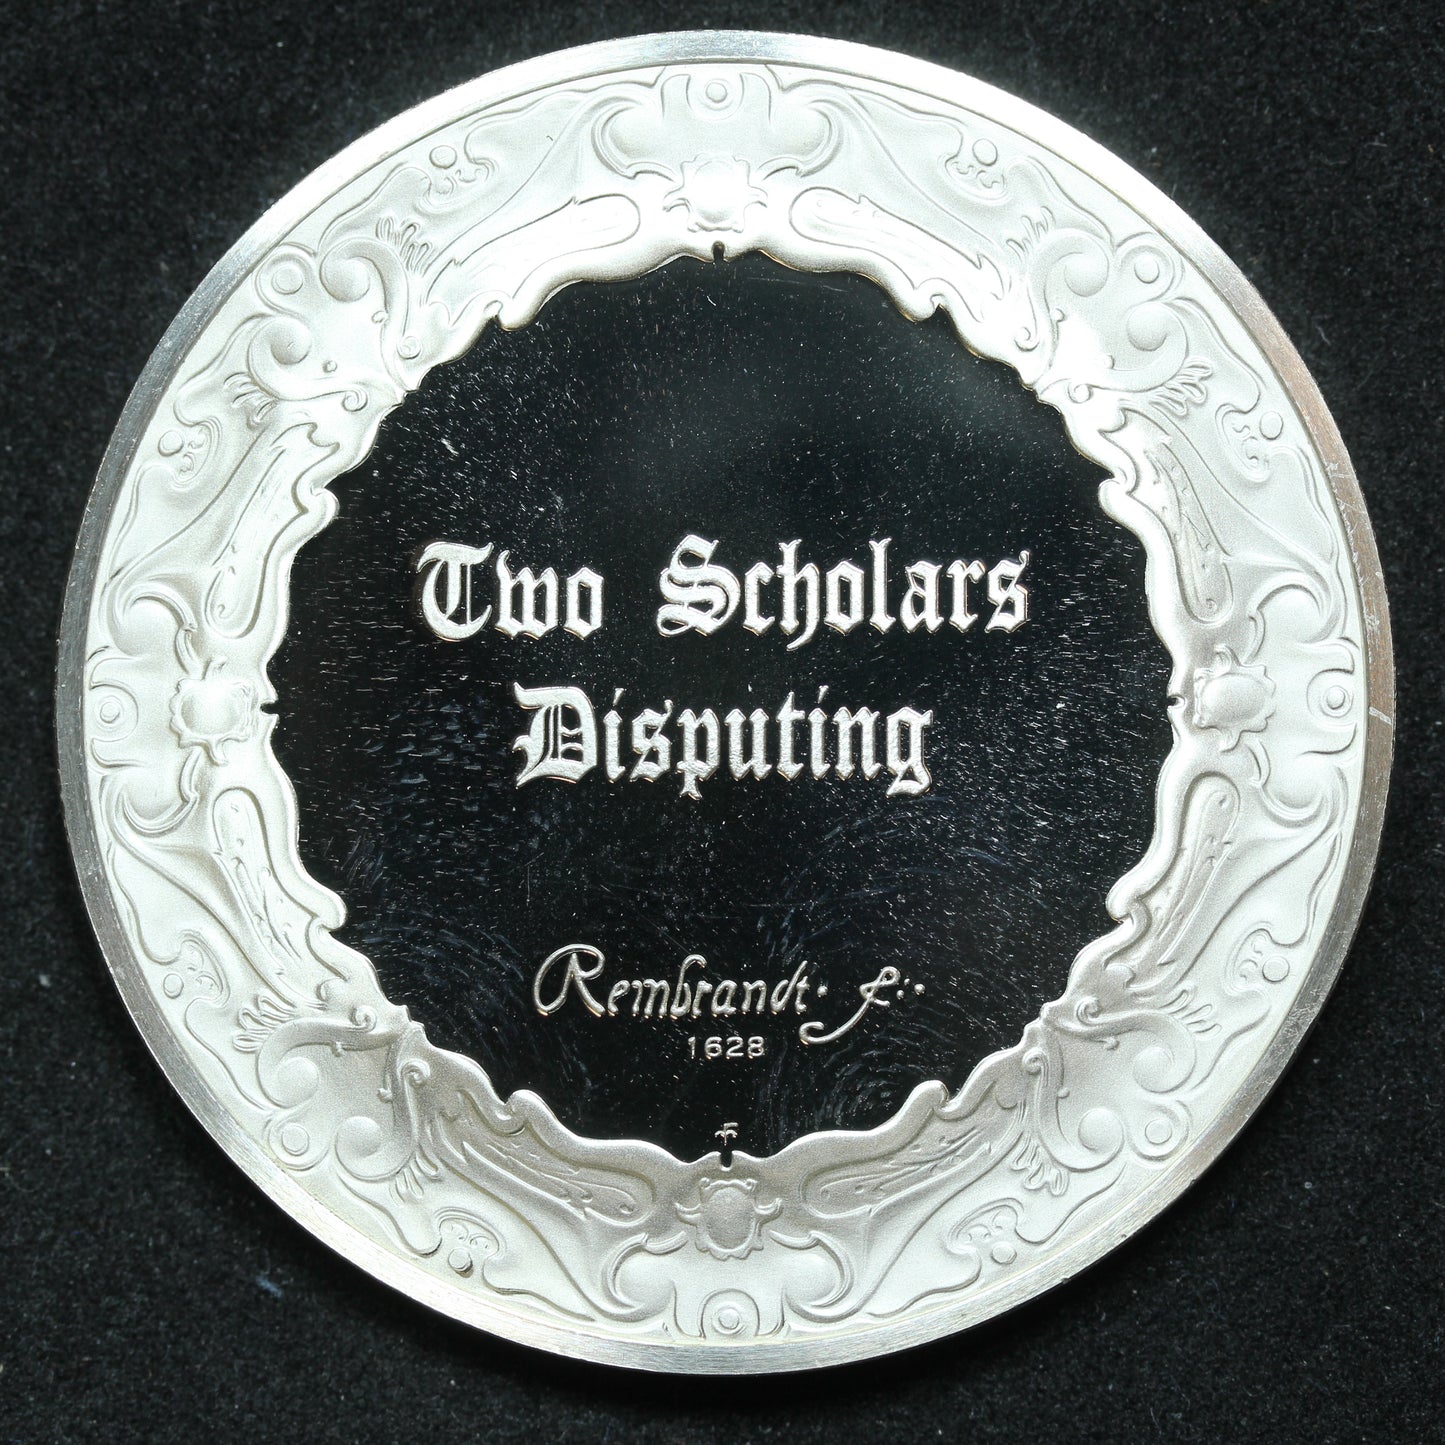 Sterling Silver Franklin Mint Genius of Rembrandt Two Scholars Disputing